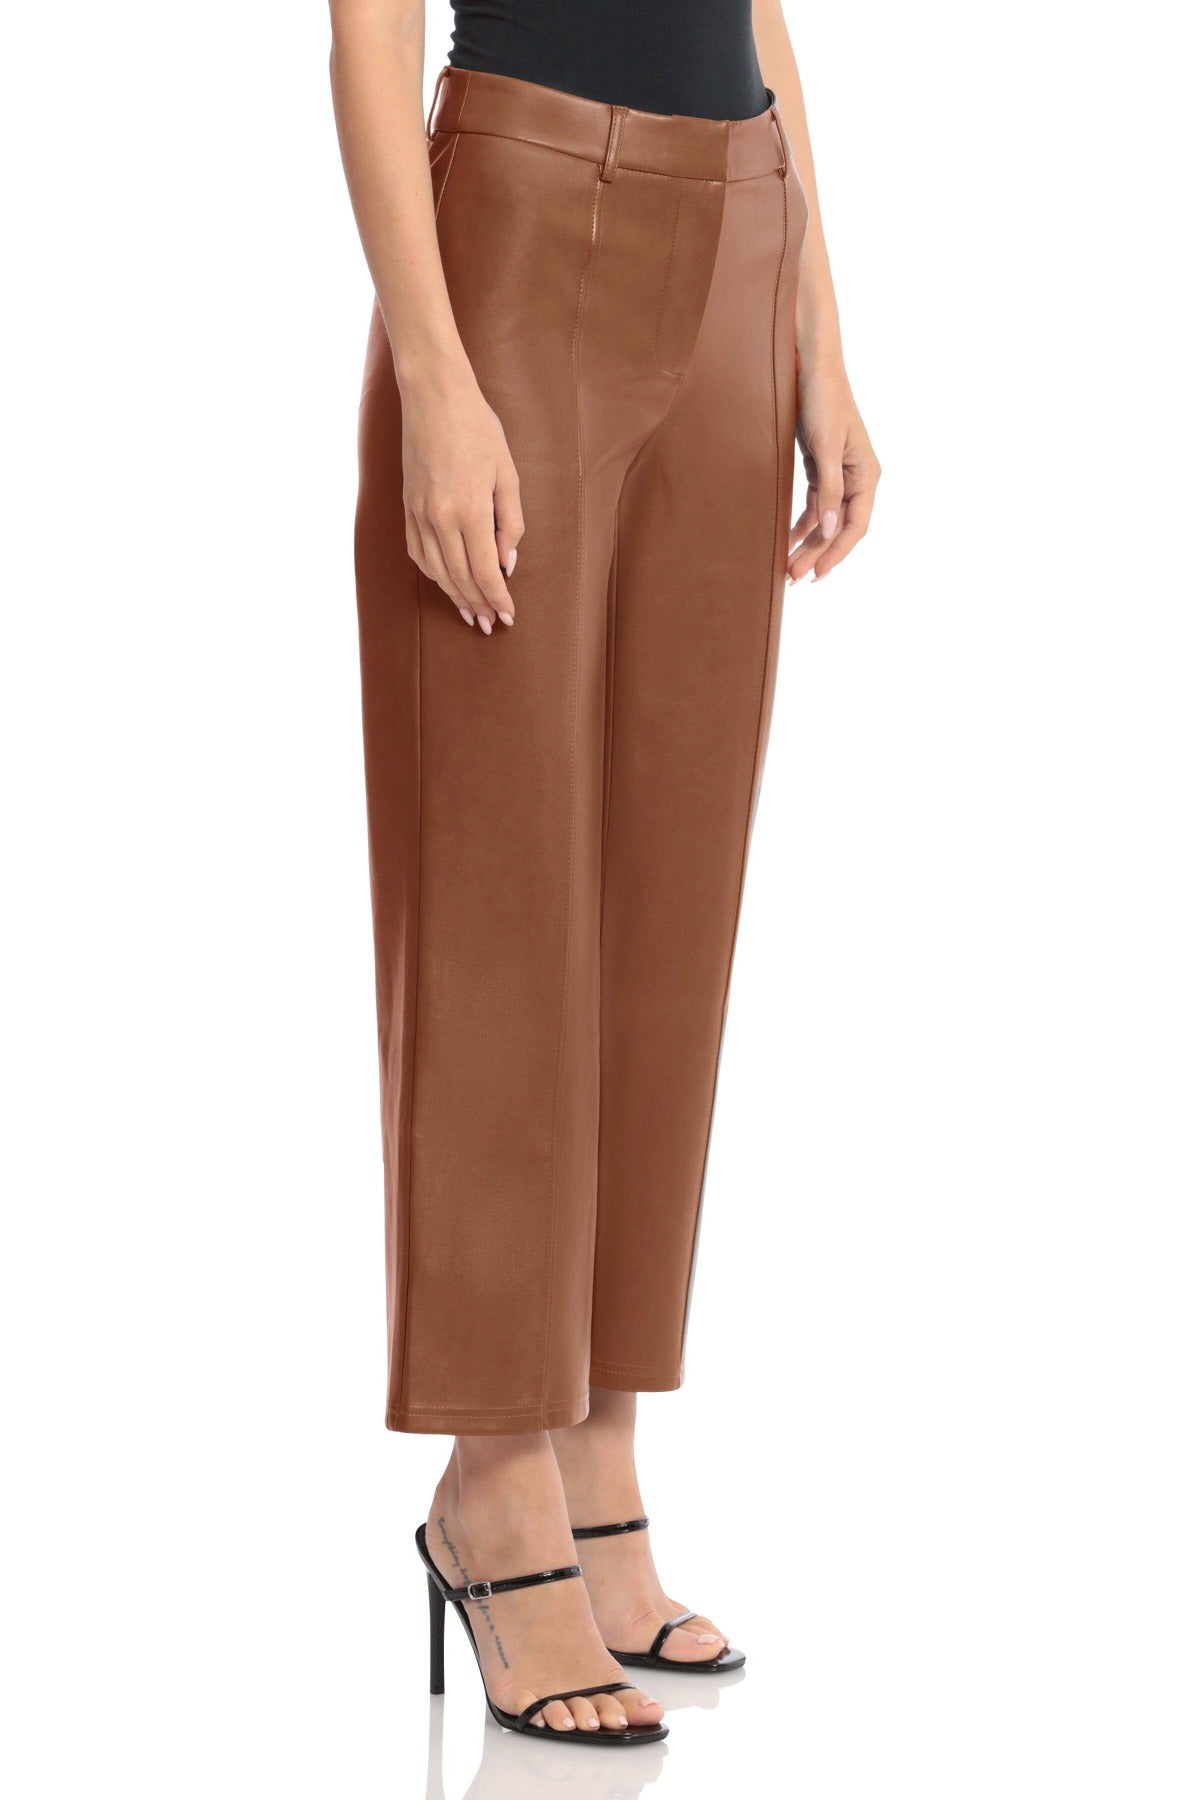 Faux Leather Seam-Front Straight Leg Trouser Pants Cognac Brown - Women's Flattering Office to Date Night Bottoms